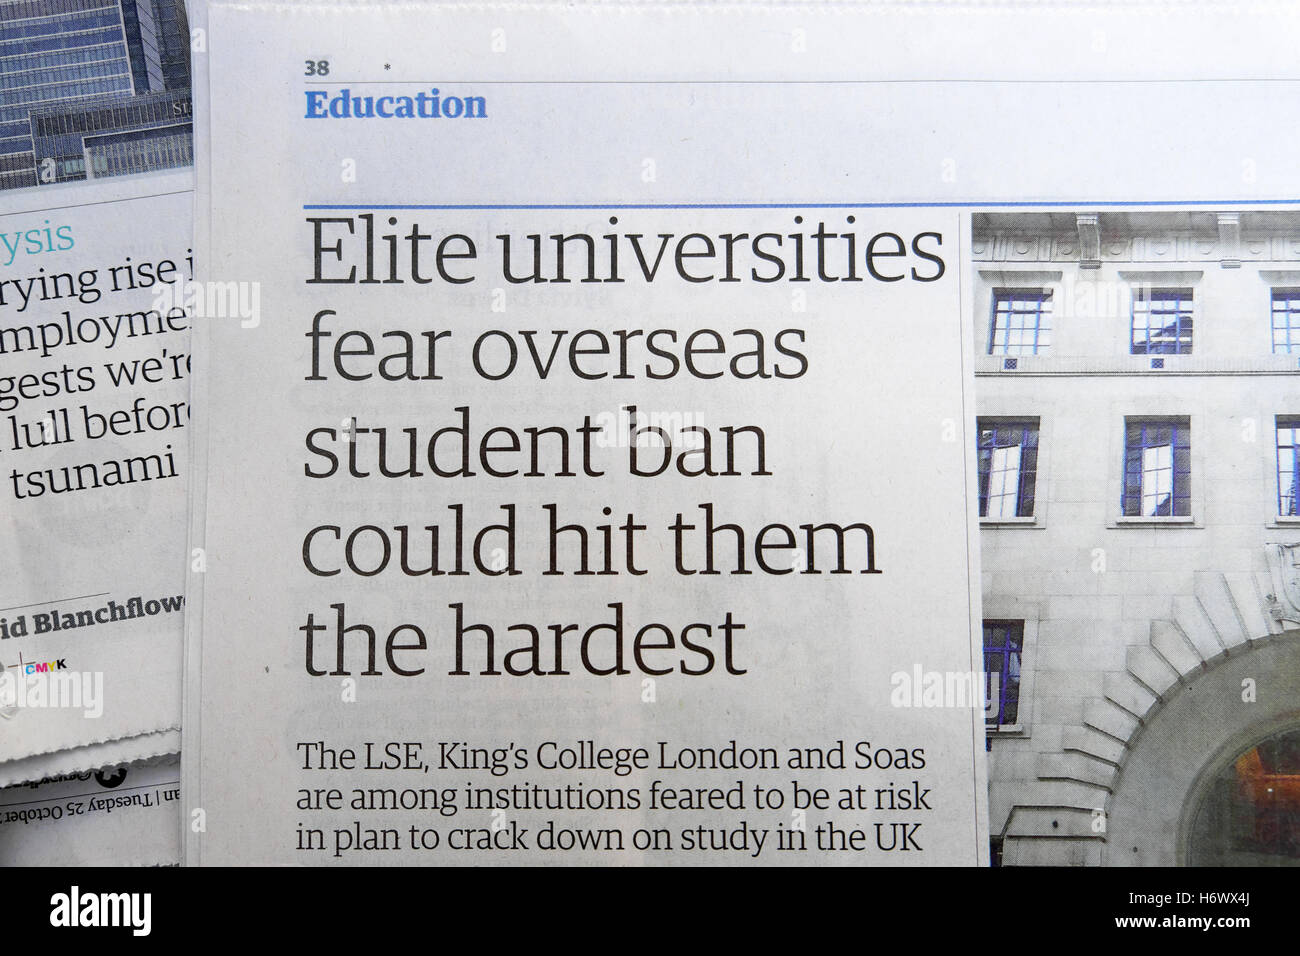 'Elite universities fear overseas student ban could hit them the hardest'  article in Guardian newspaper article 2016 London UK Stock Photo